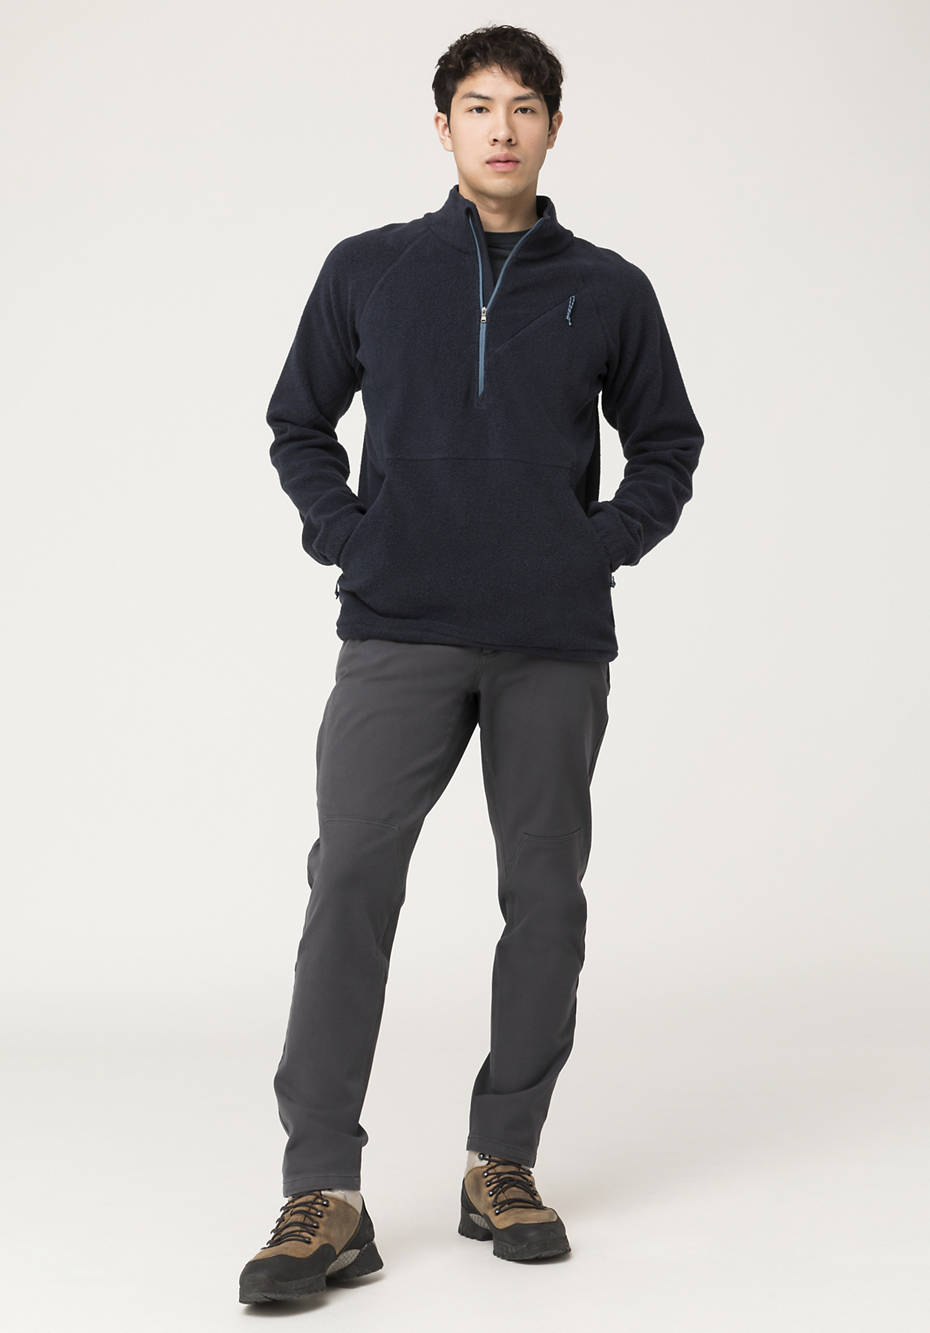 BetterRecycling Fleece-Troyer made of pure organic cotton